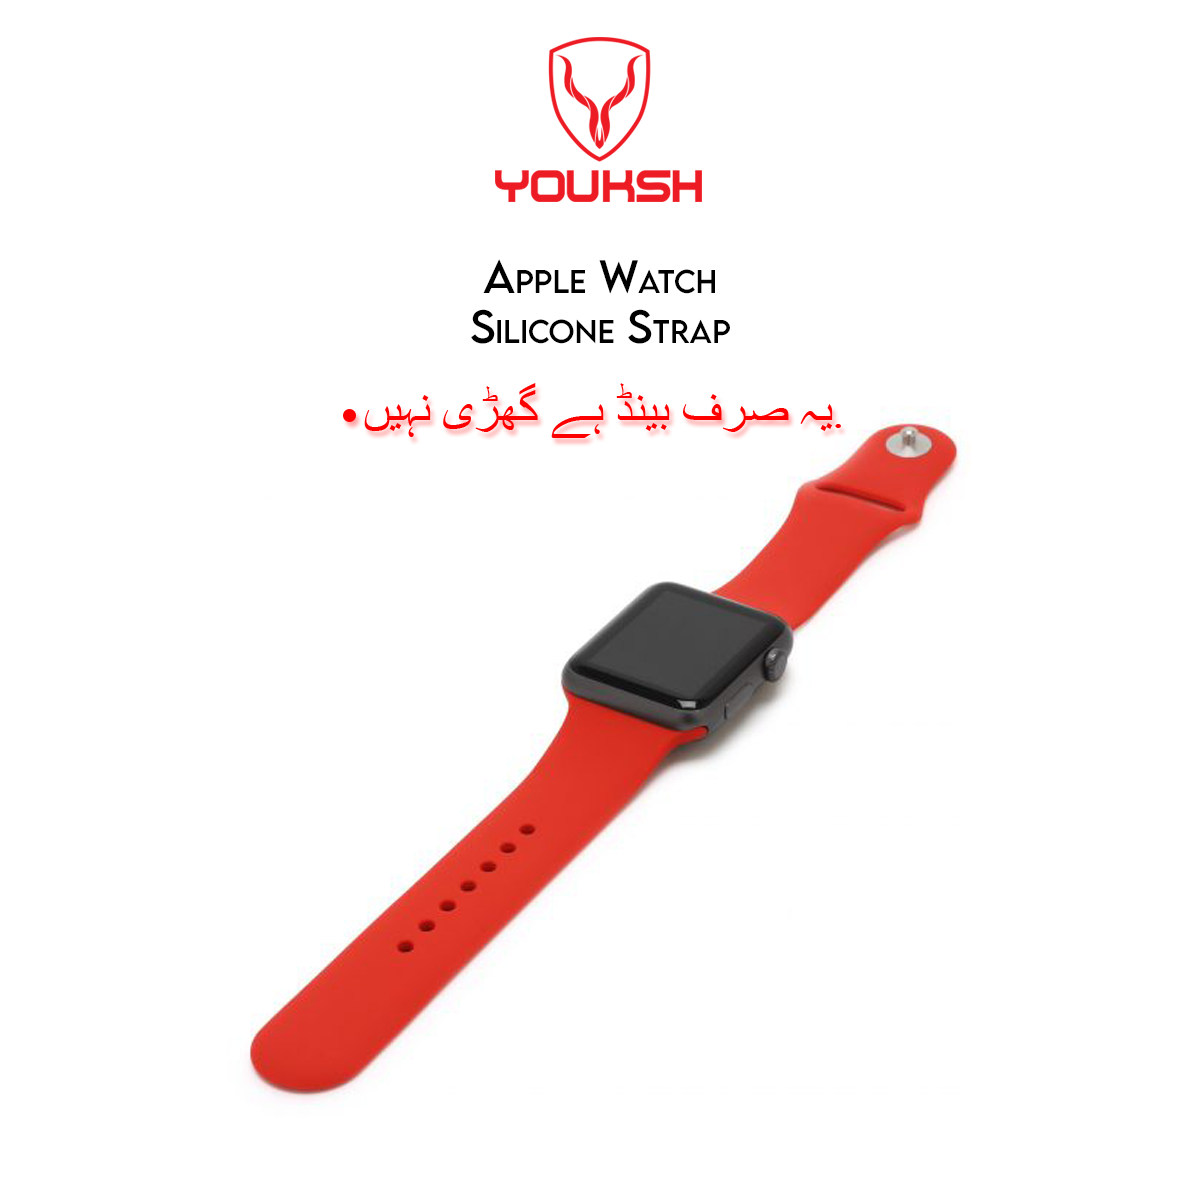 YOUKSH - Apple Watch 38mm/40mm Silicone Strap - 38mm/40mm Silicone Strap - 38mm/40mm Silicone Band Strap - For Apple Series - 1/2/3/4/5/6.